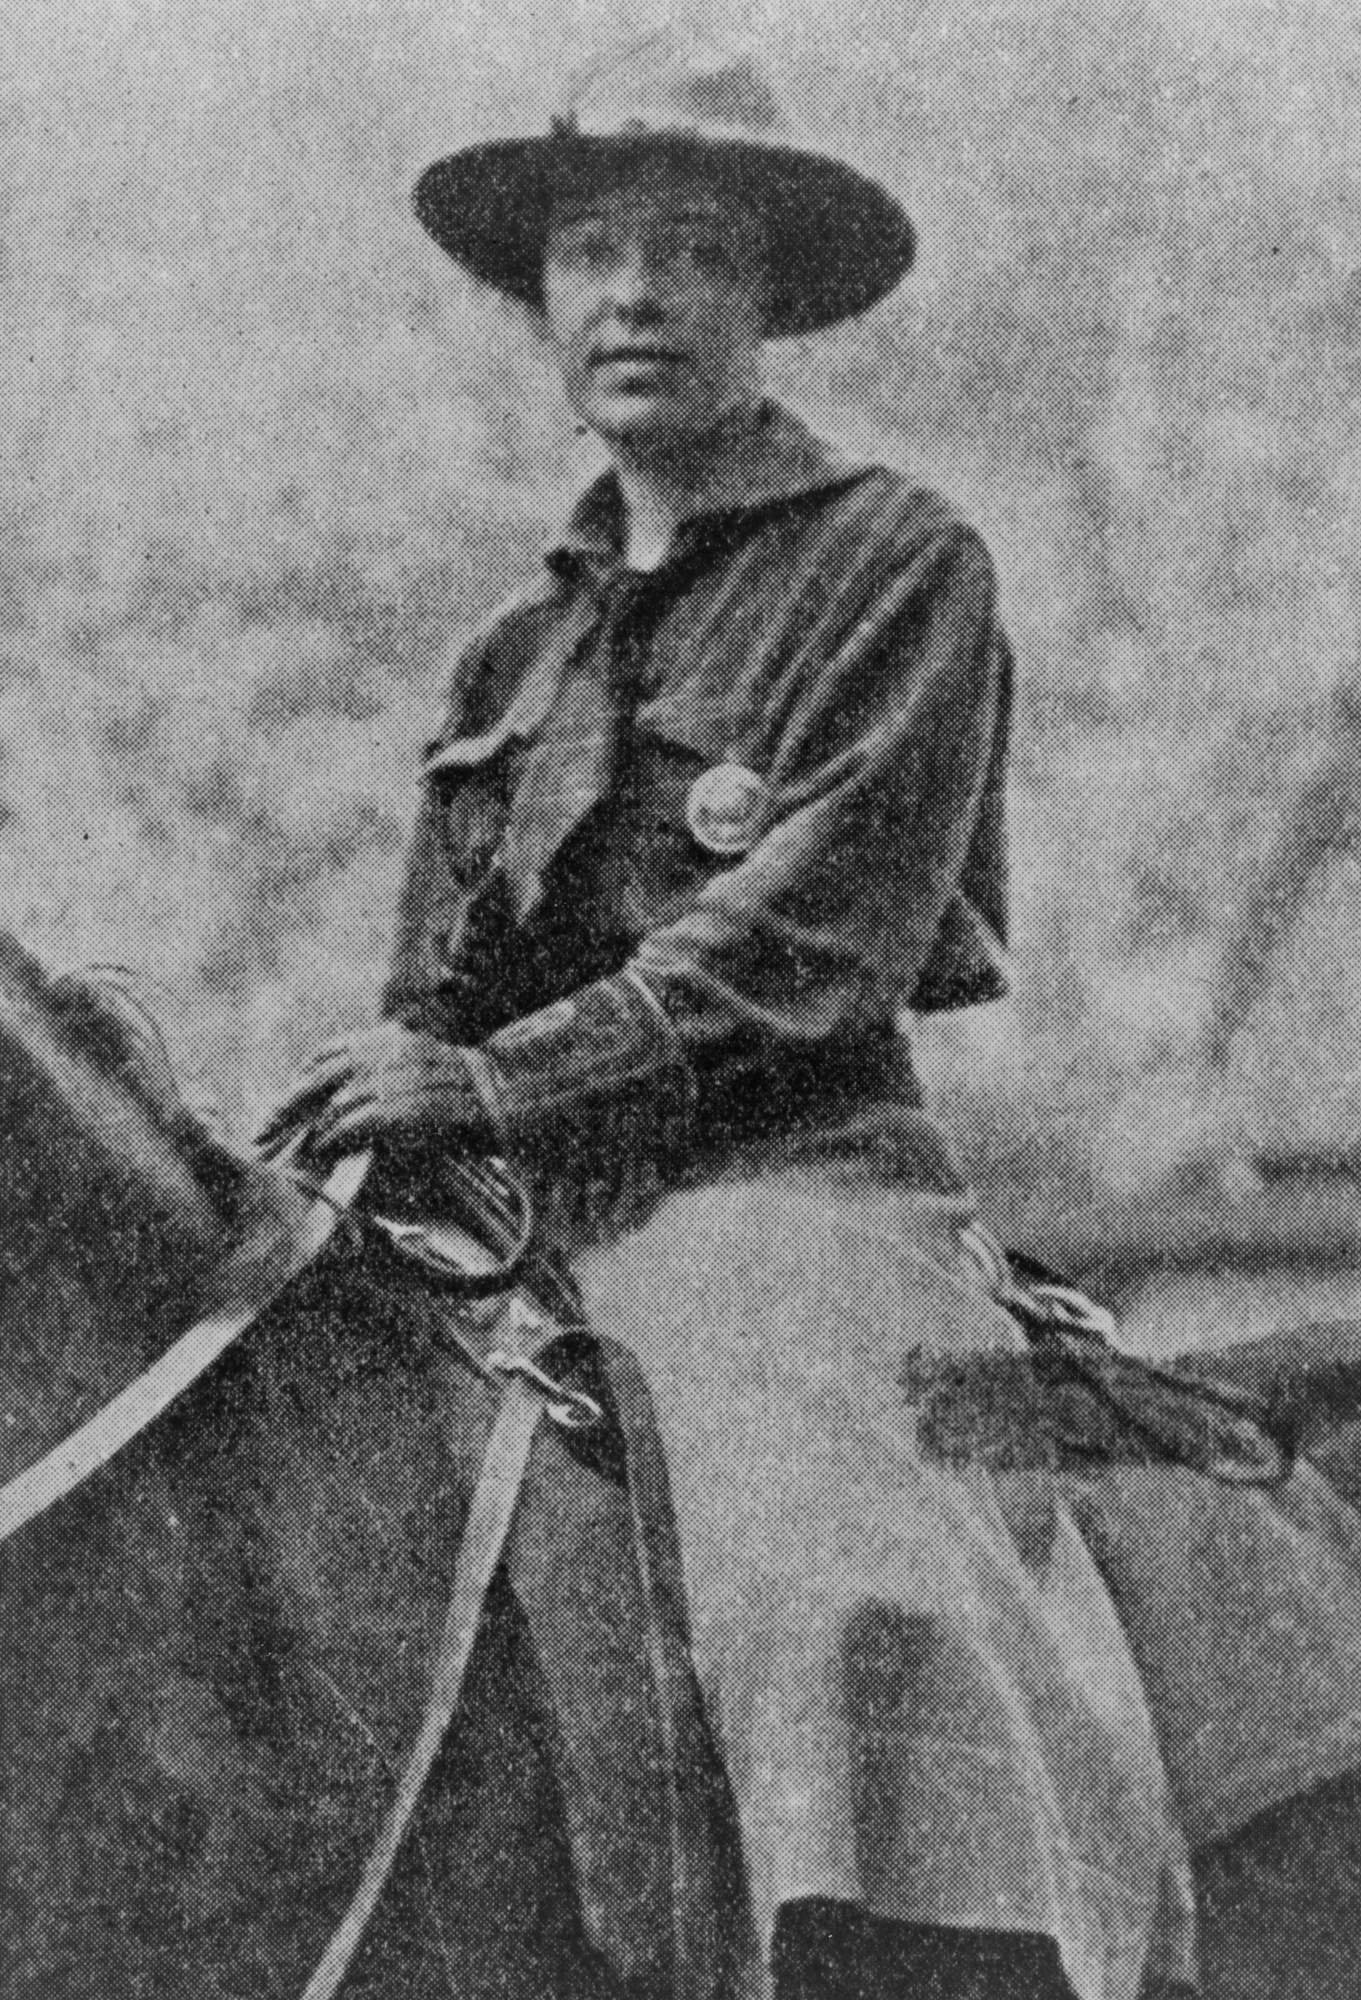 Clare Hodges on horseback wearing a split skirt, shirt, bandana, gloves, and a flat brim hat with a round badge pinned on the pocket.